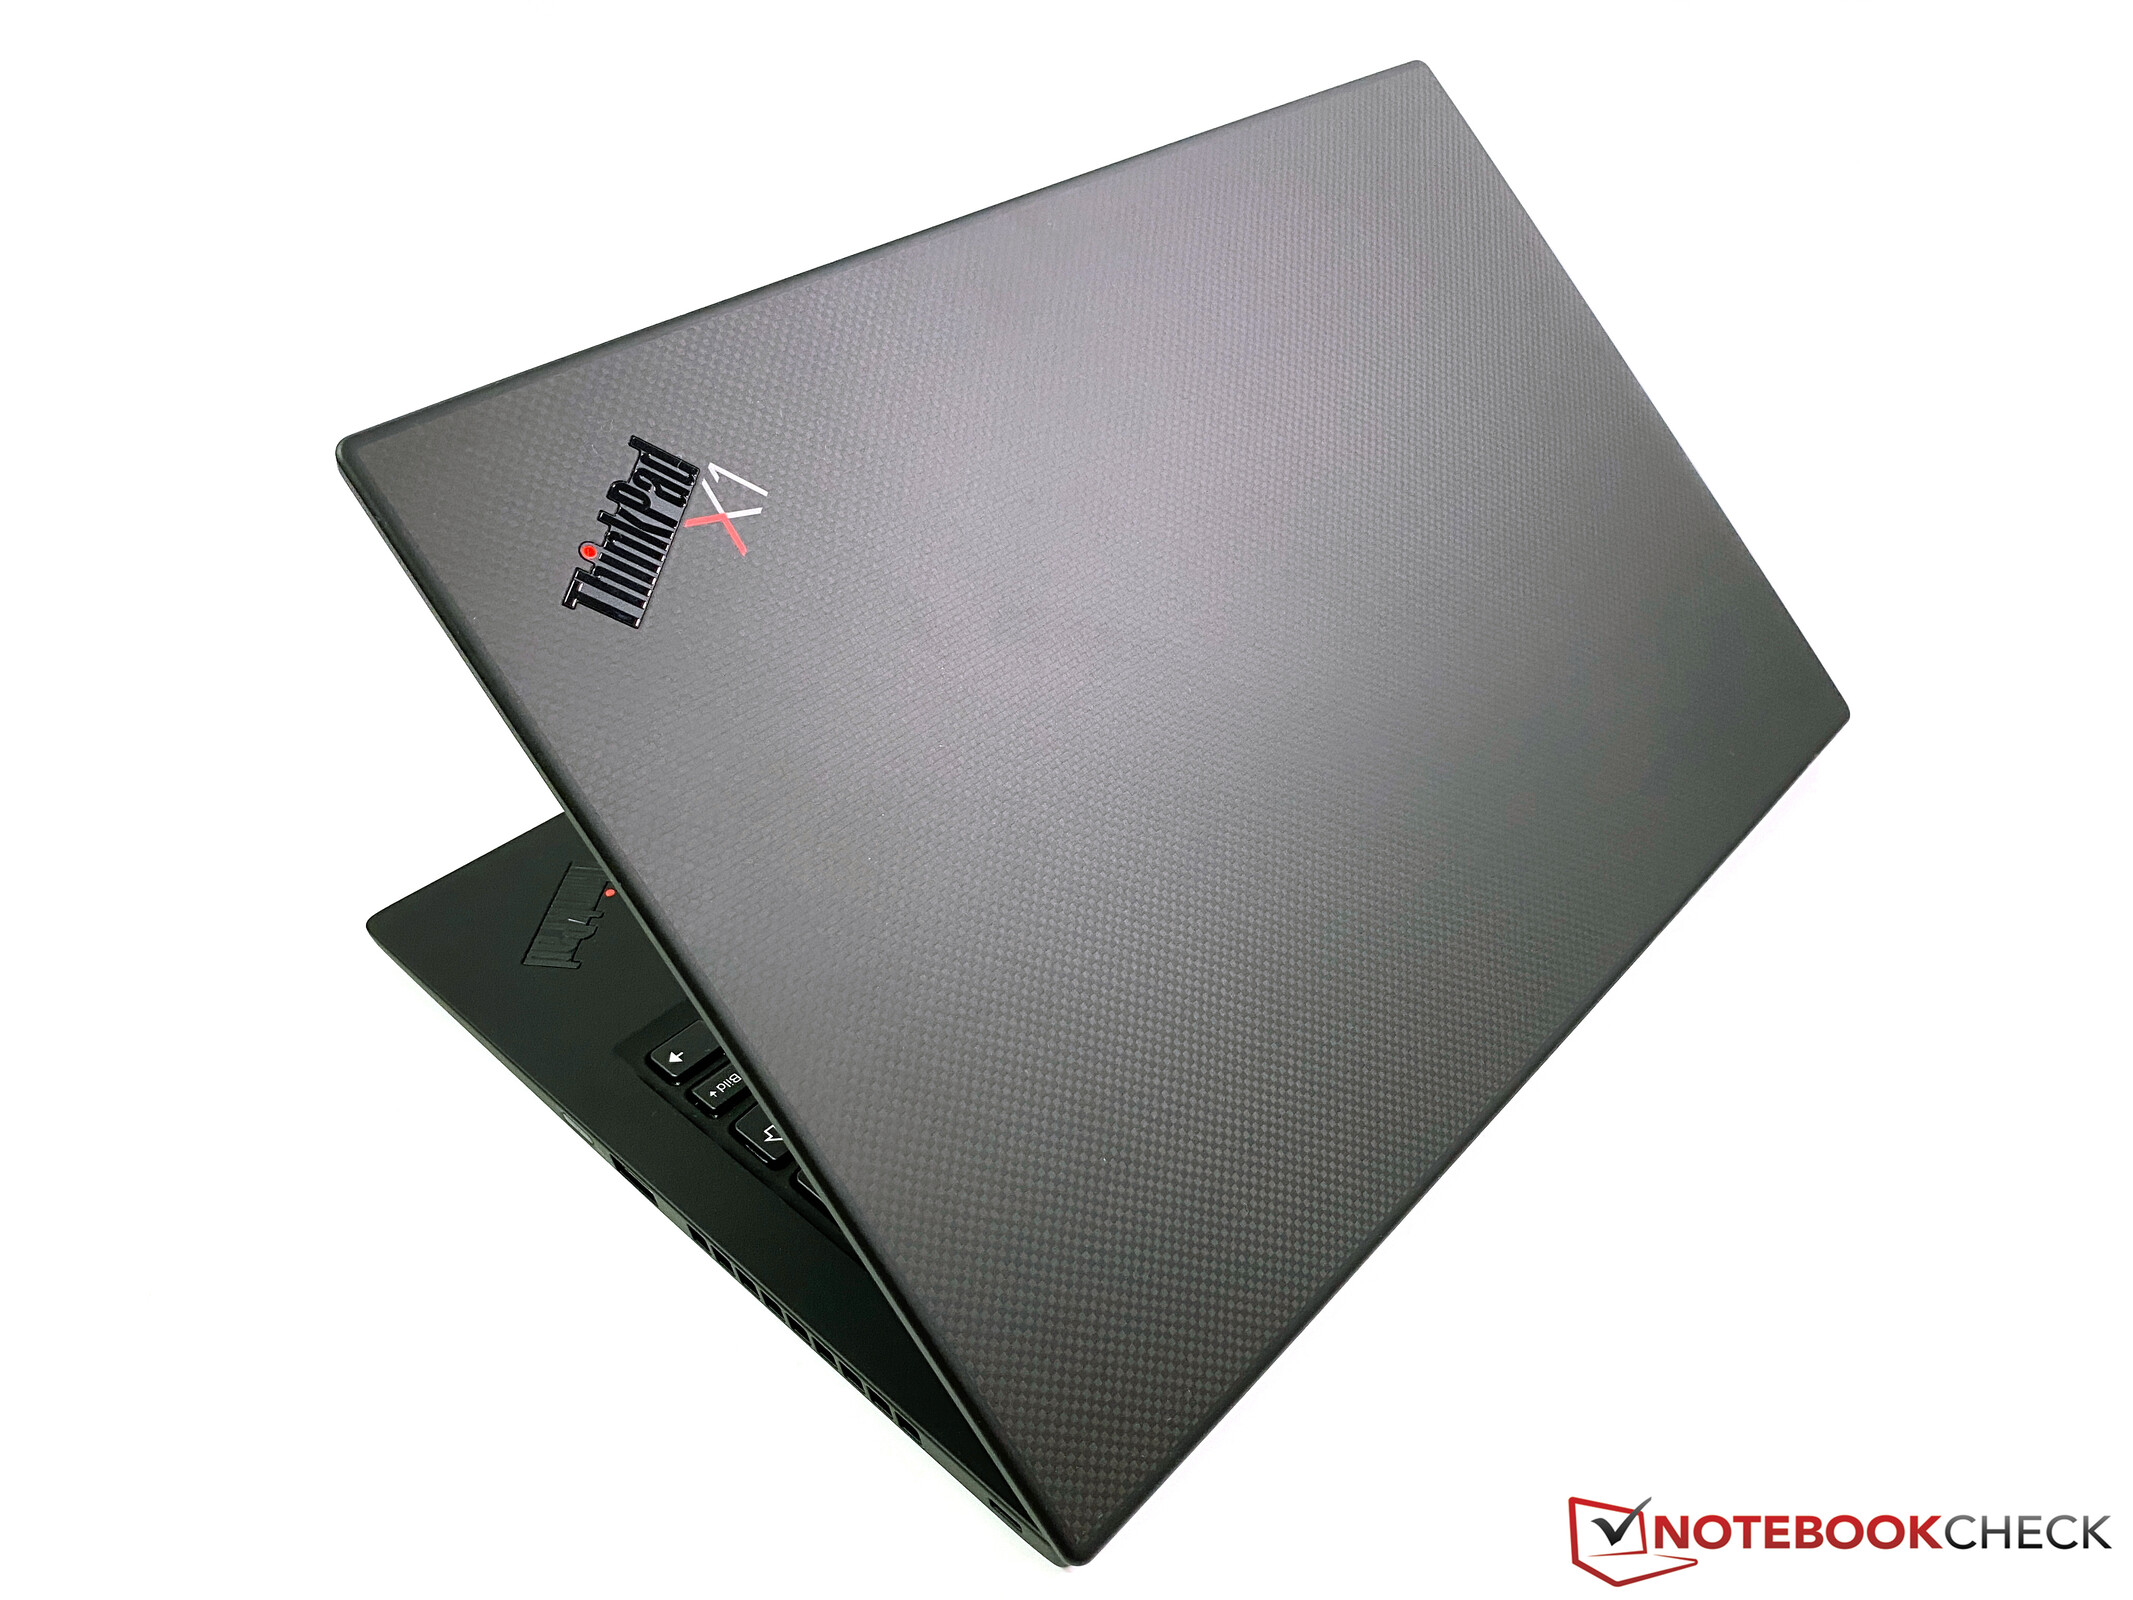 Lenovo ThinkPad X1 Carbon 2020: The 4K display suffers from PWM flickering   News